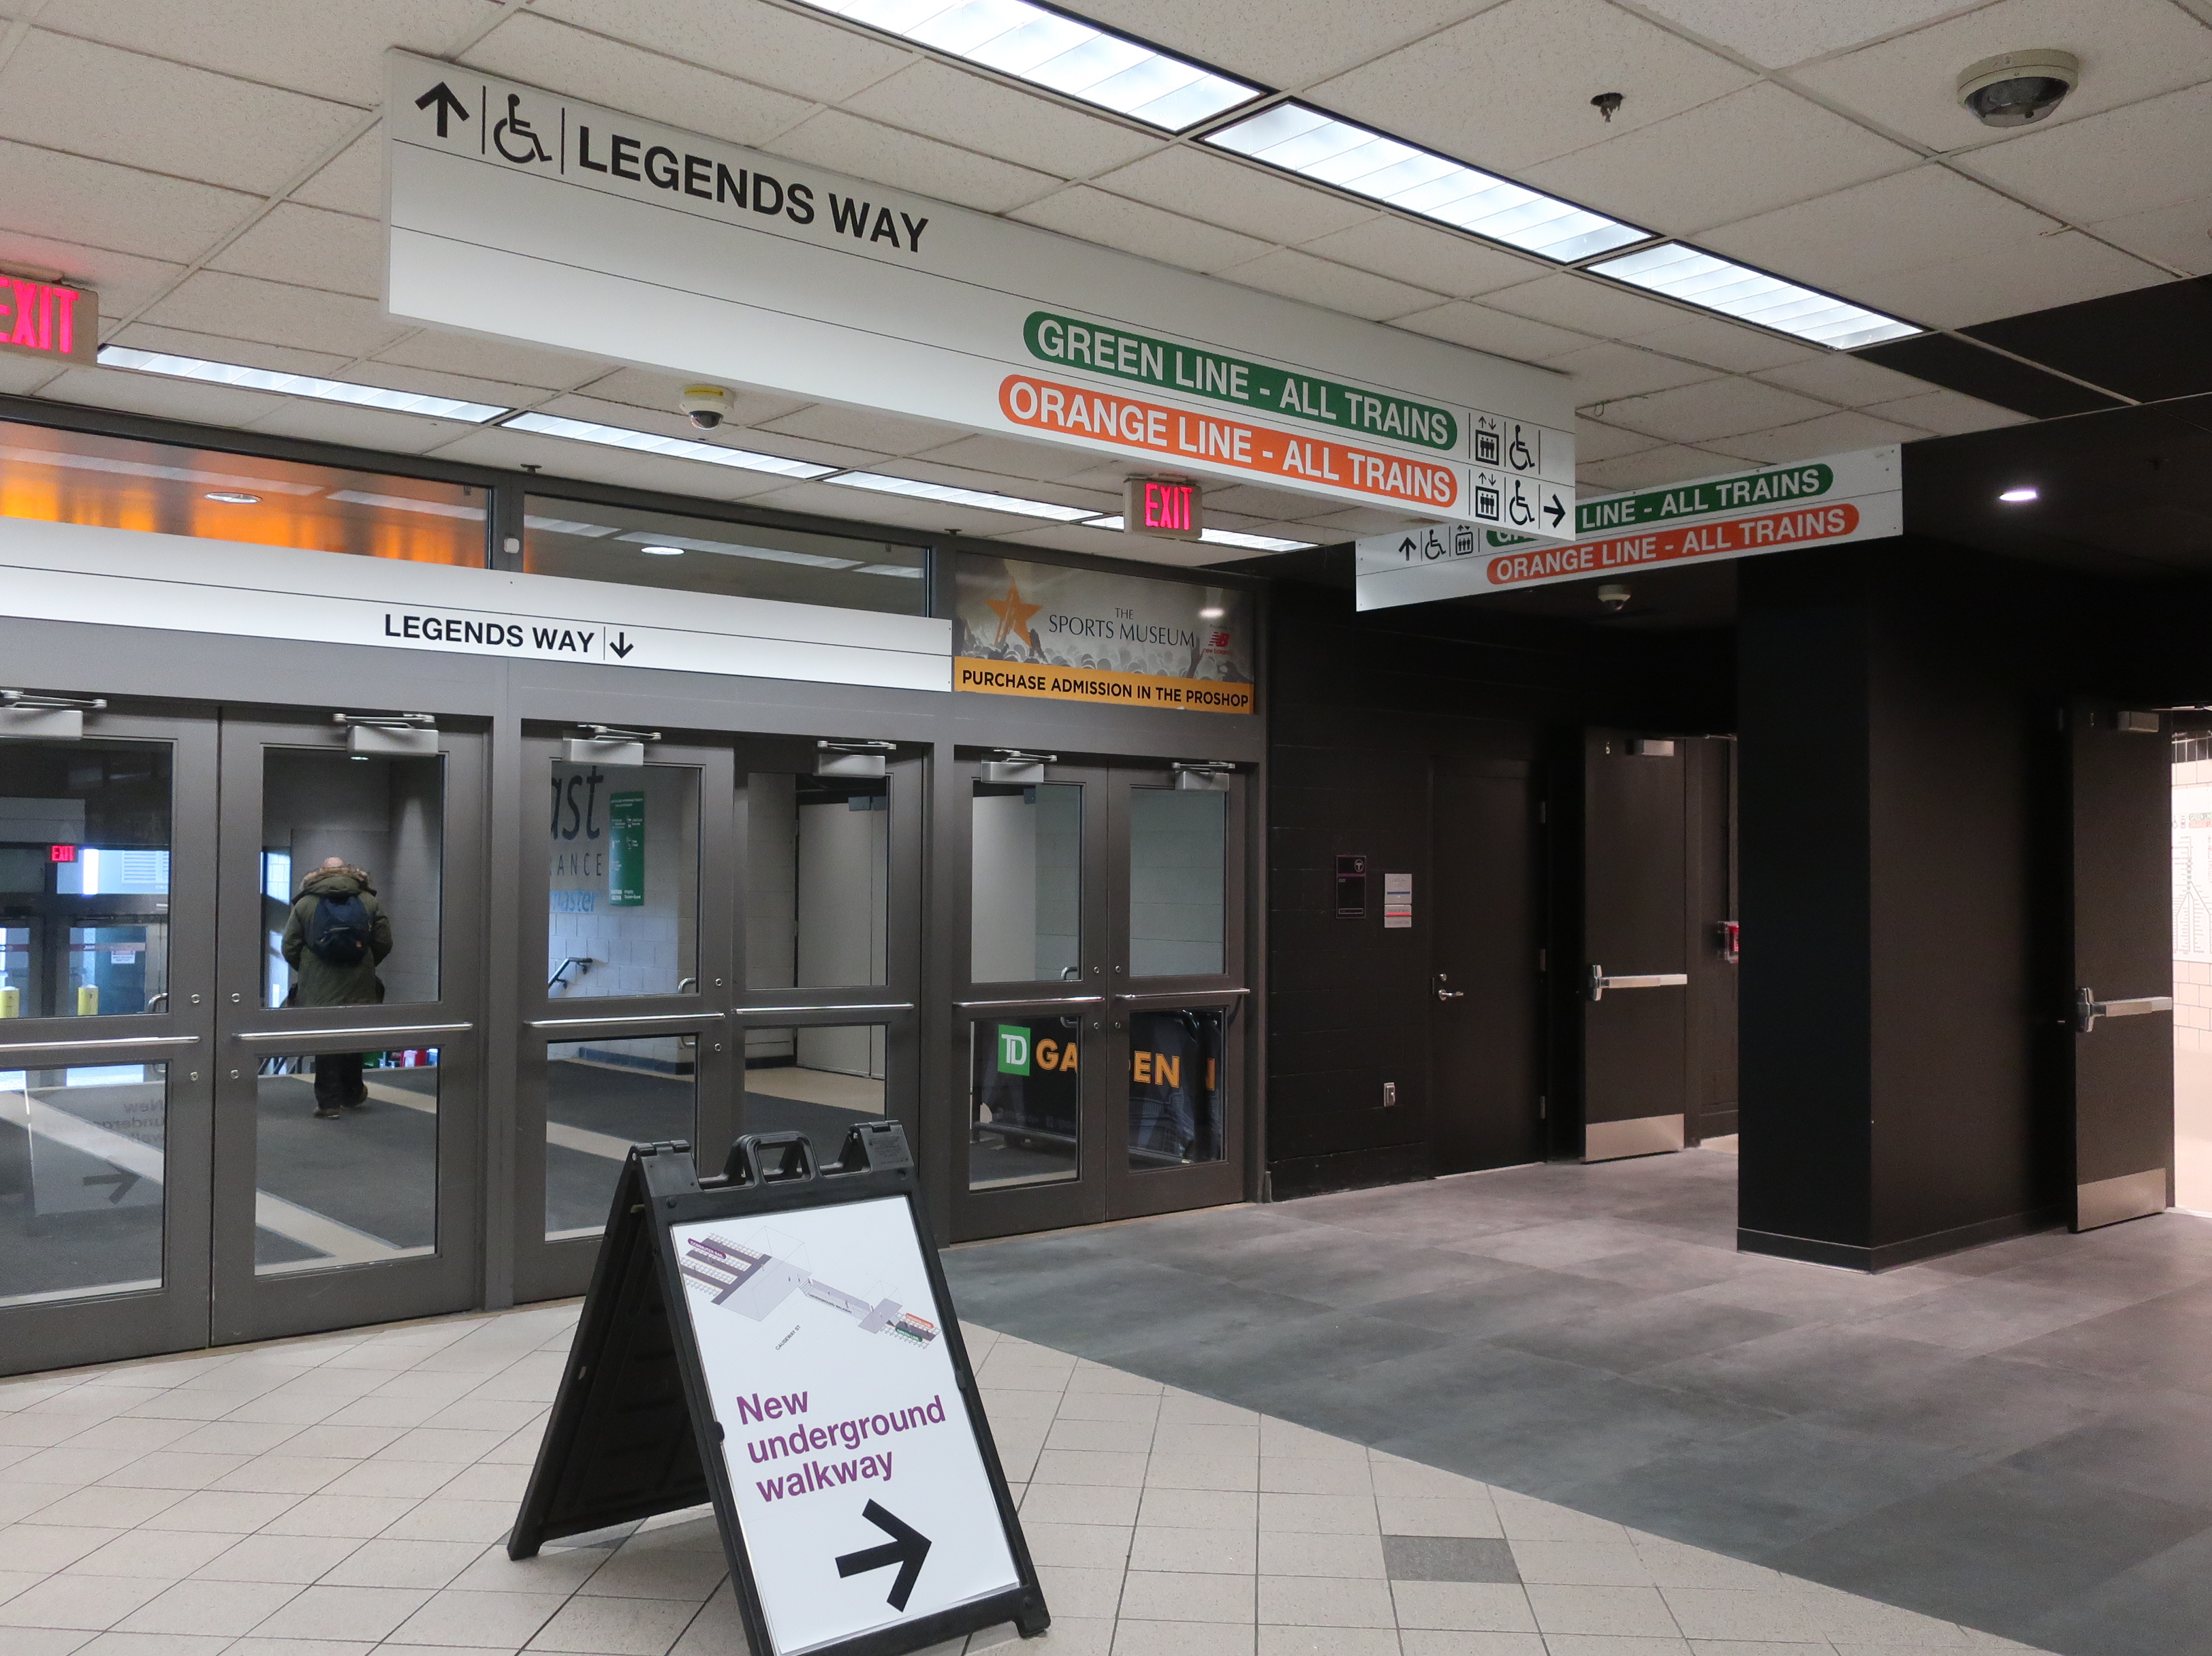 Improvements to North Station and TD Garden taking shape